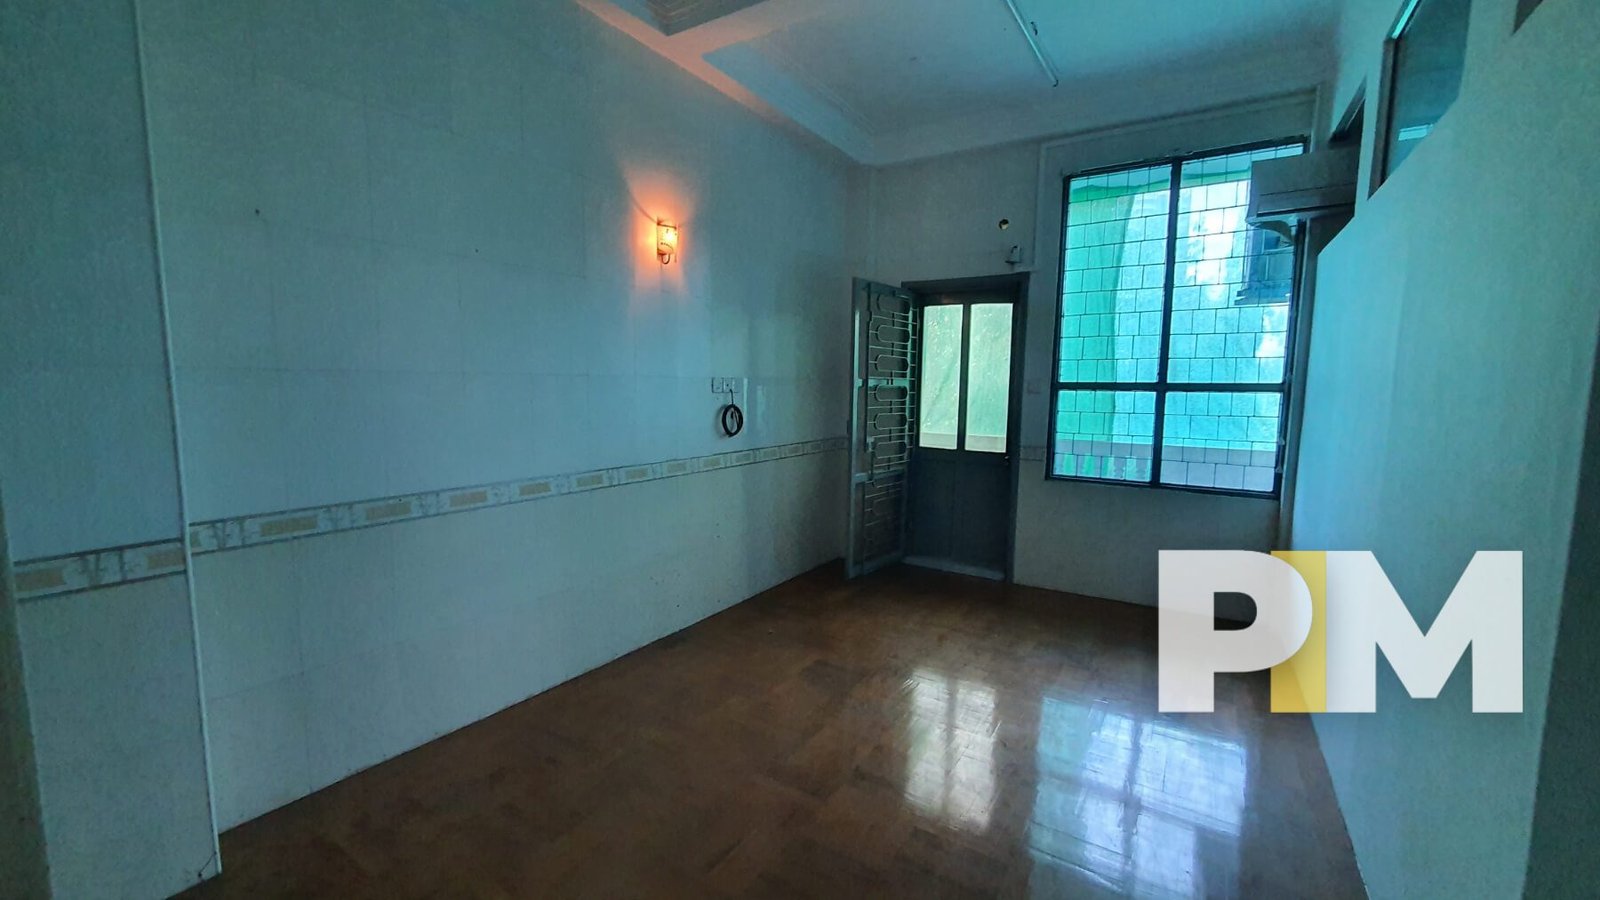 Open space with window - Yangon Real Estate